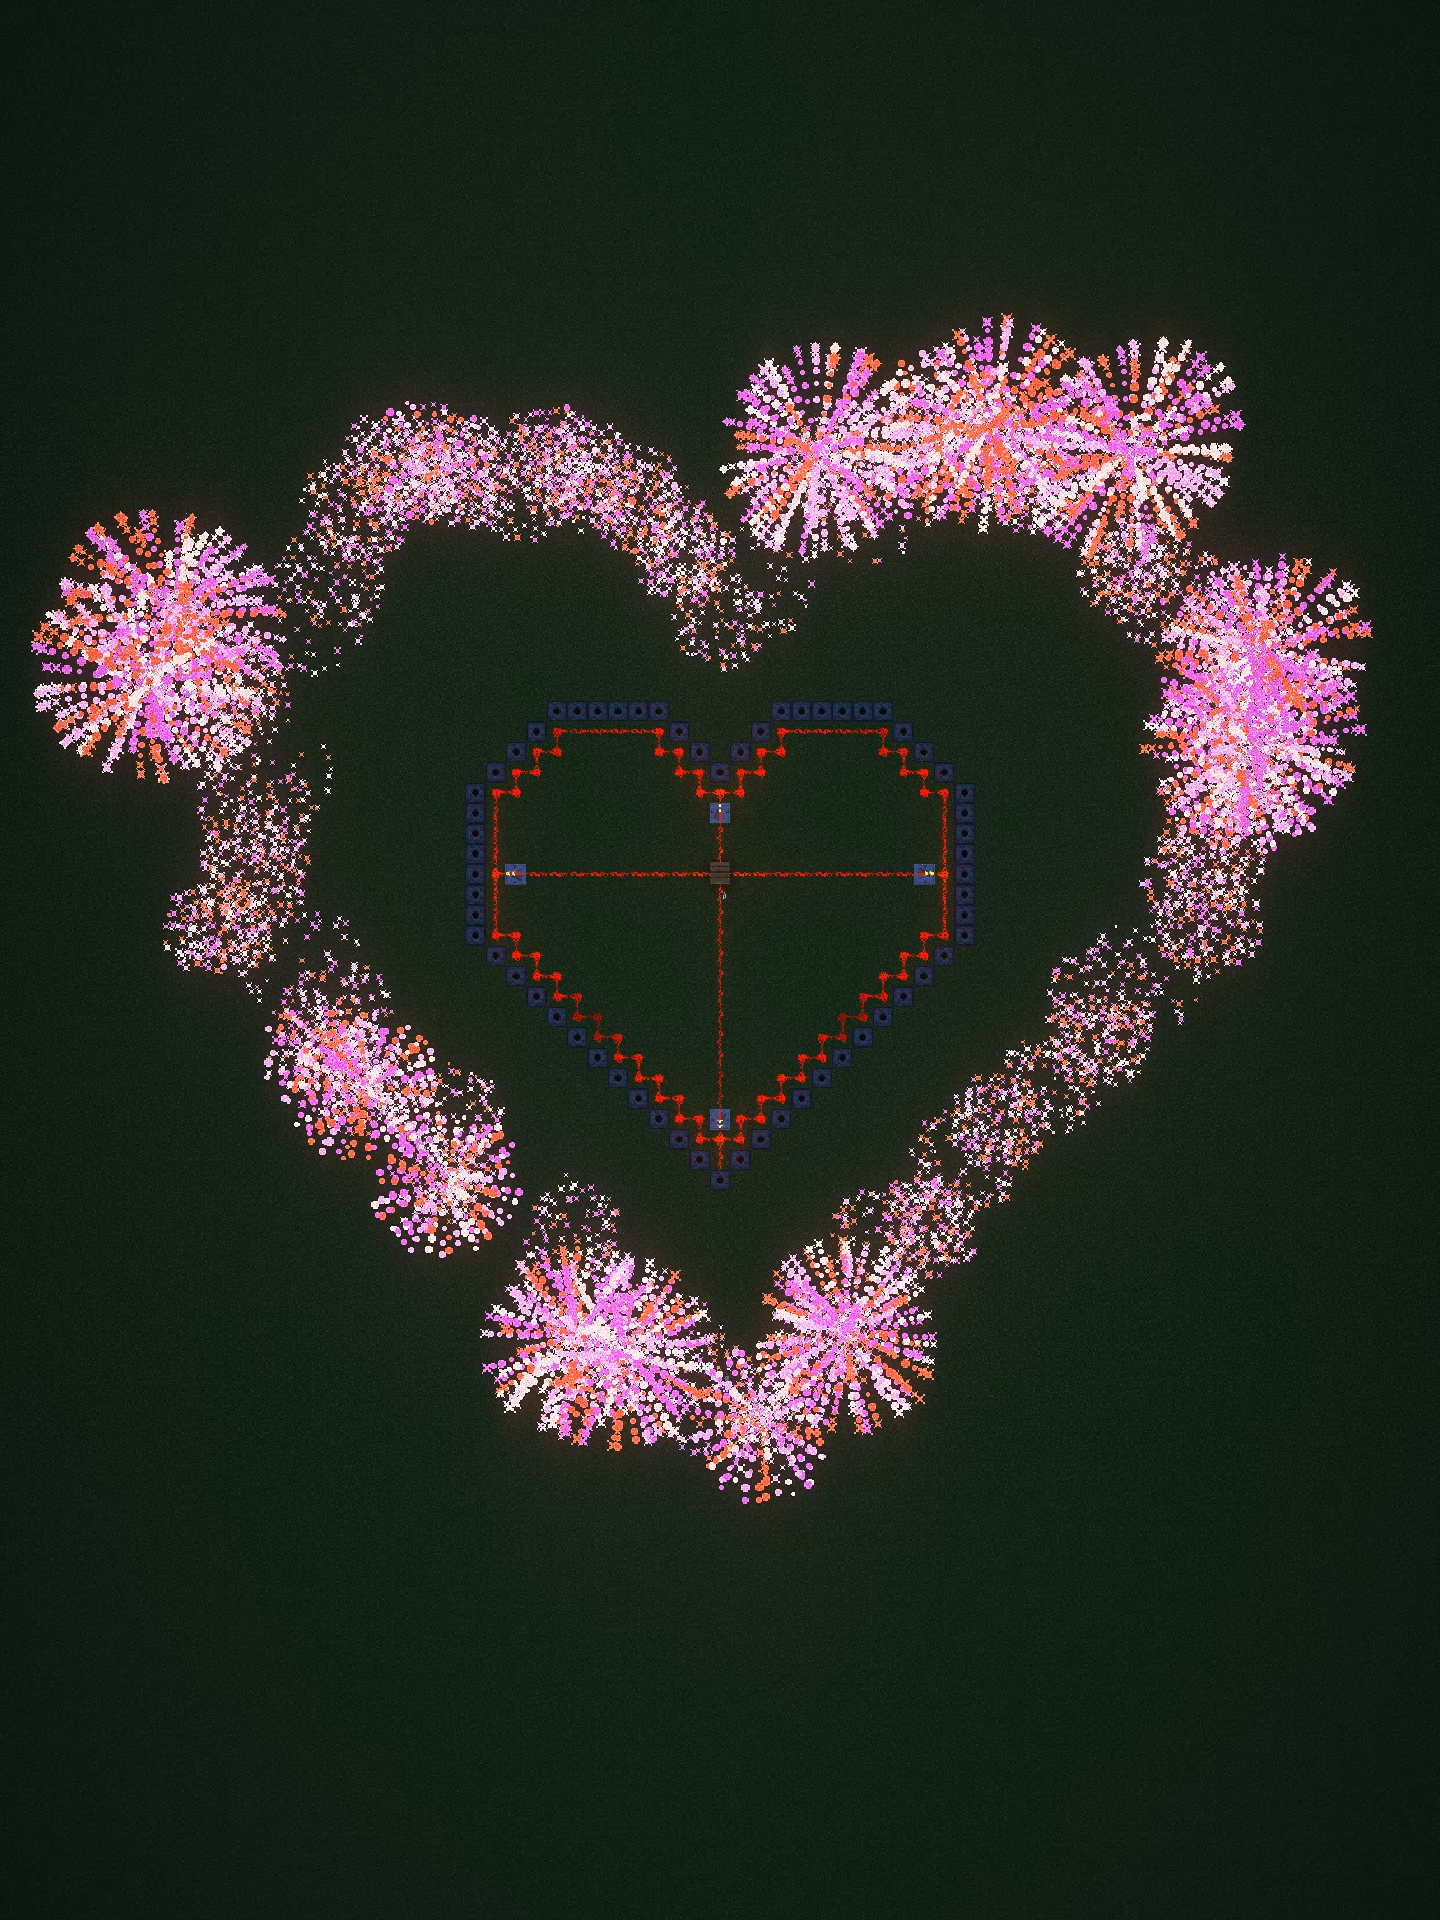 Send This To Someone Special🥰 #Minecraft #minecraftbuilding #minecraftbuilds #minecrafttutorial